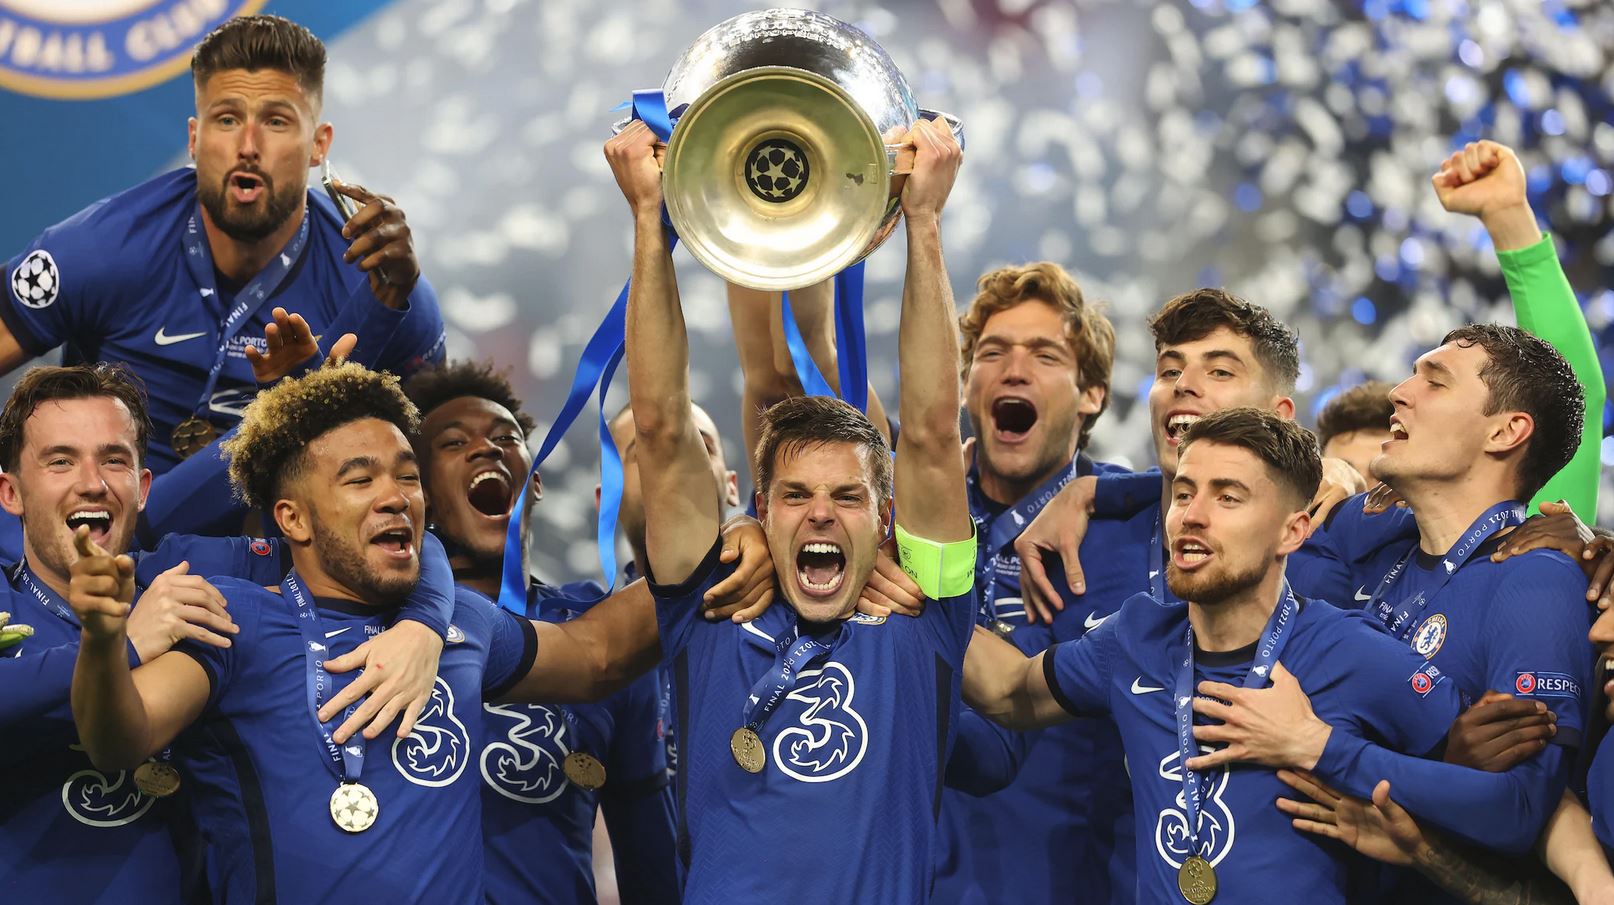 Chelsea conquered the second Champions League of their history as they beat Manchester City 1-0 in the rescheduled Final in Porto